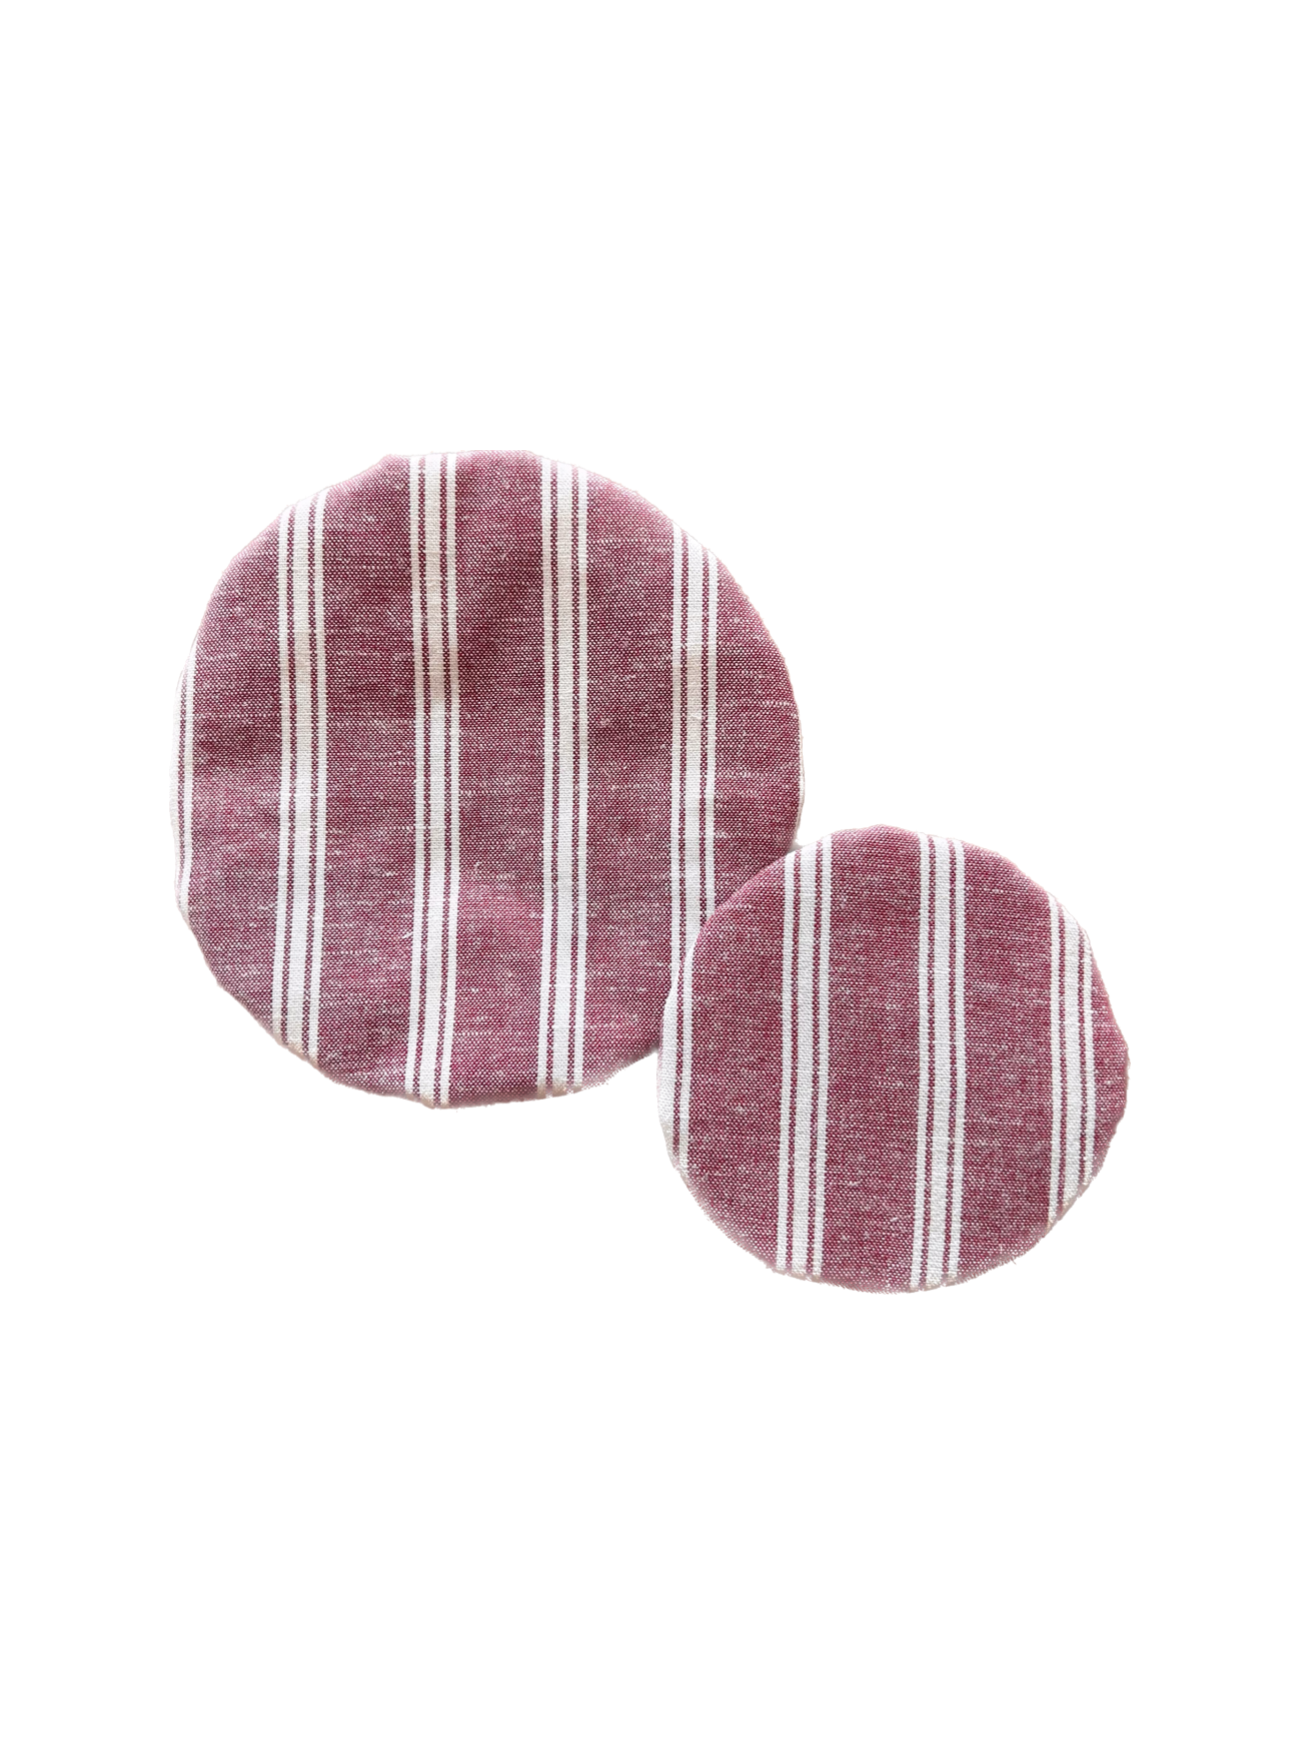 Beeswax Jar Covers, Red Stripe